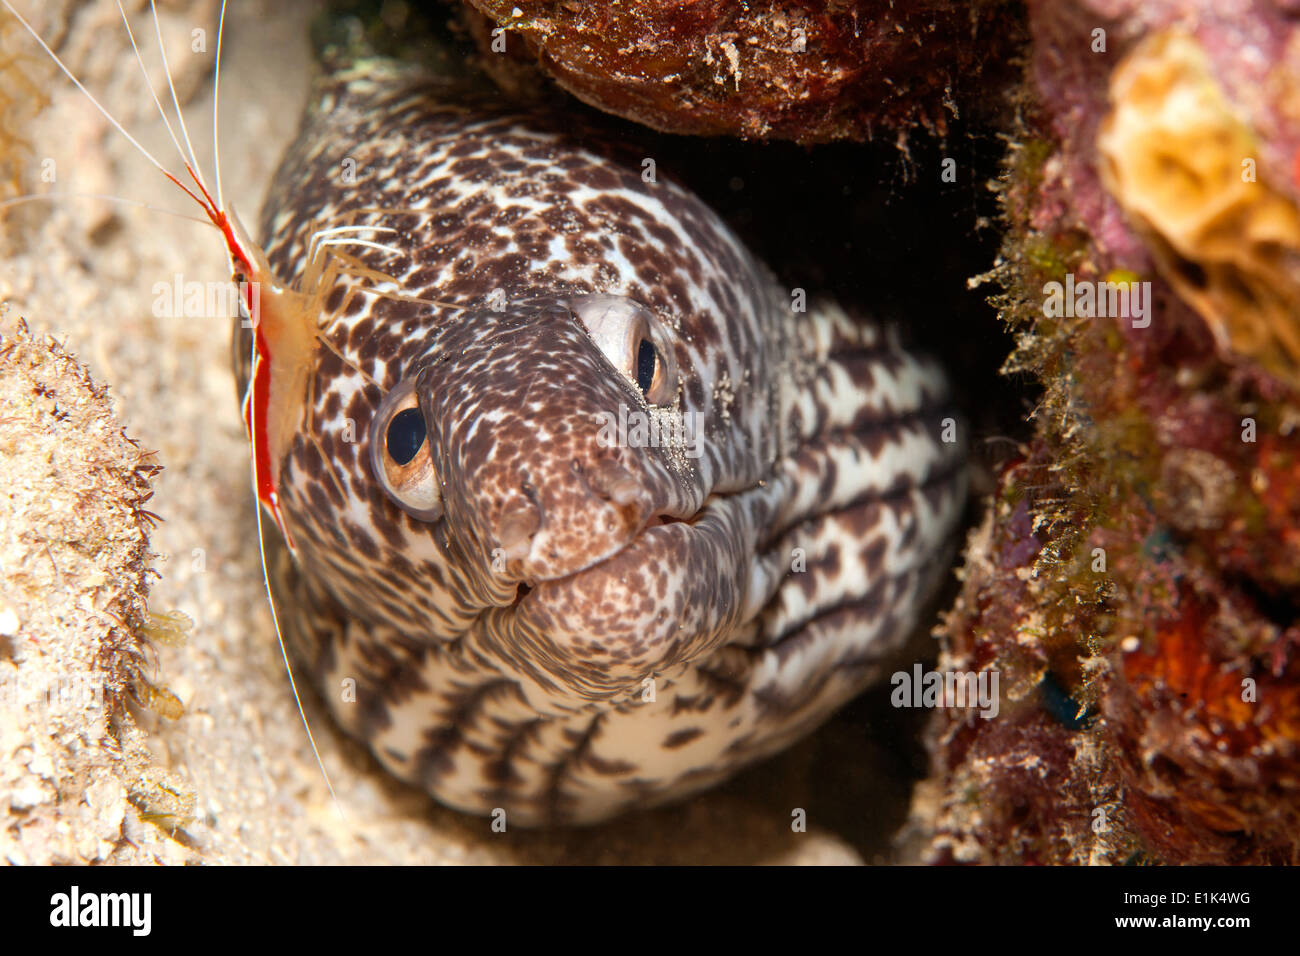 Caribbean, Antilles, Curacao, Westpunt, Laced moray, Gymnothorax favagineus, and Cleaner shrimp, Lysmata grabhami Stock Photo